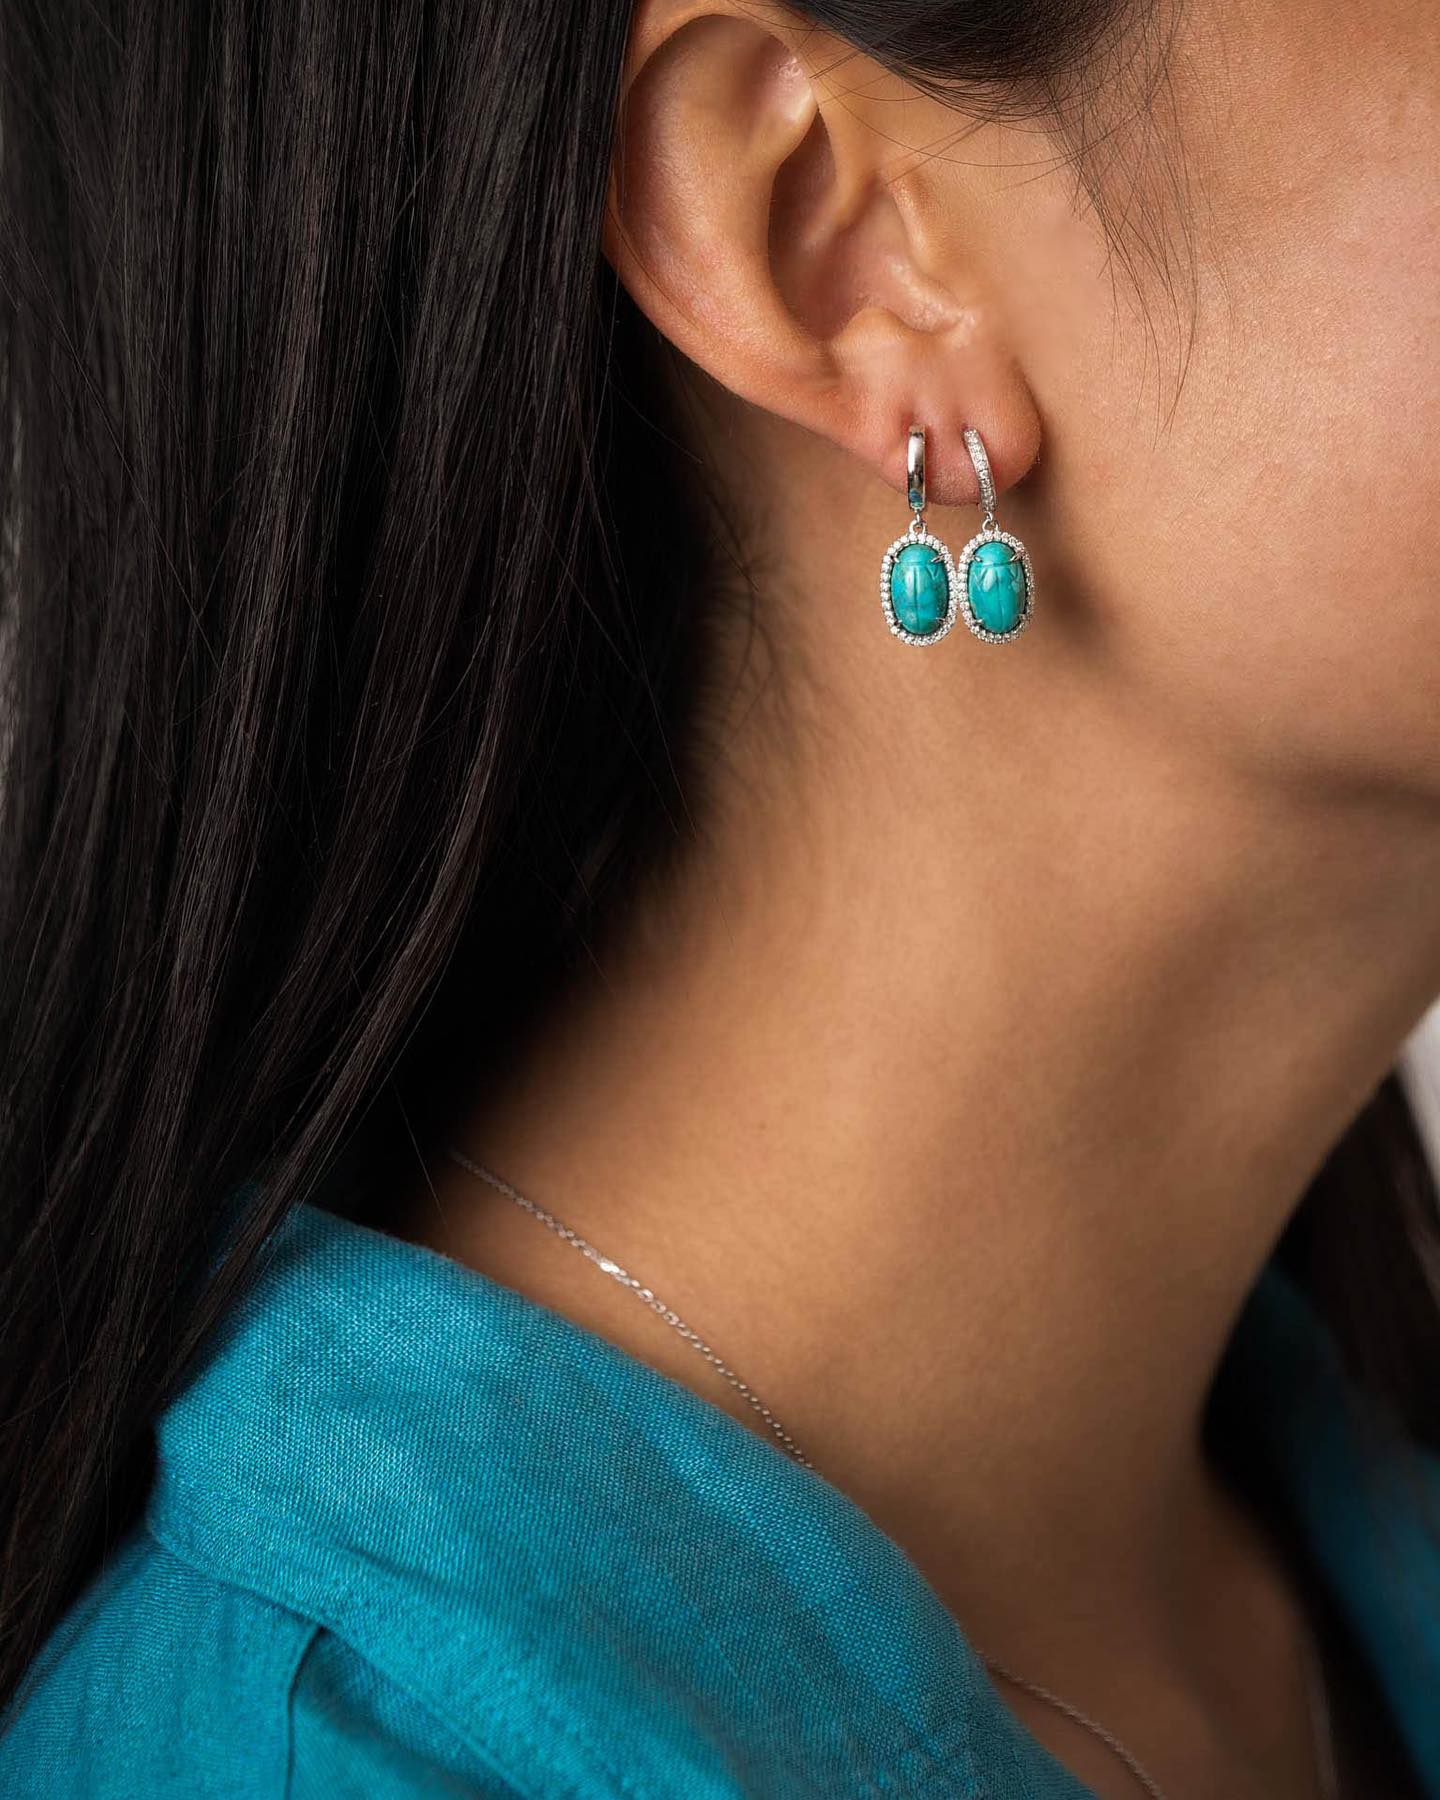 Scarabée Collection in 18ct White Gold - Turquoise earrings set with White Diamonds. 
#myritazia

Details are everything, take a closer look. 
.
.
.
.
.
.
#jewelryfashion #jewelryblogger #jewerly #jewels #trendyjewelry #jewelrylovers #handmadejewelry #jewelrylover #jewelrydesigner